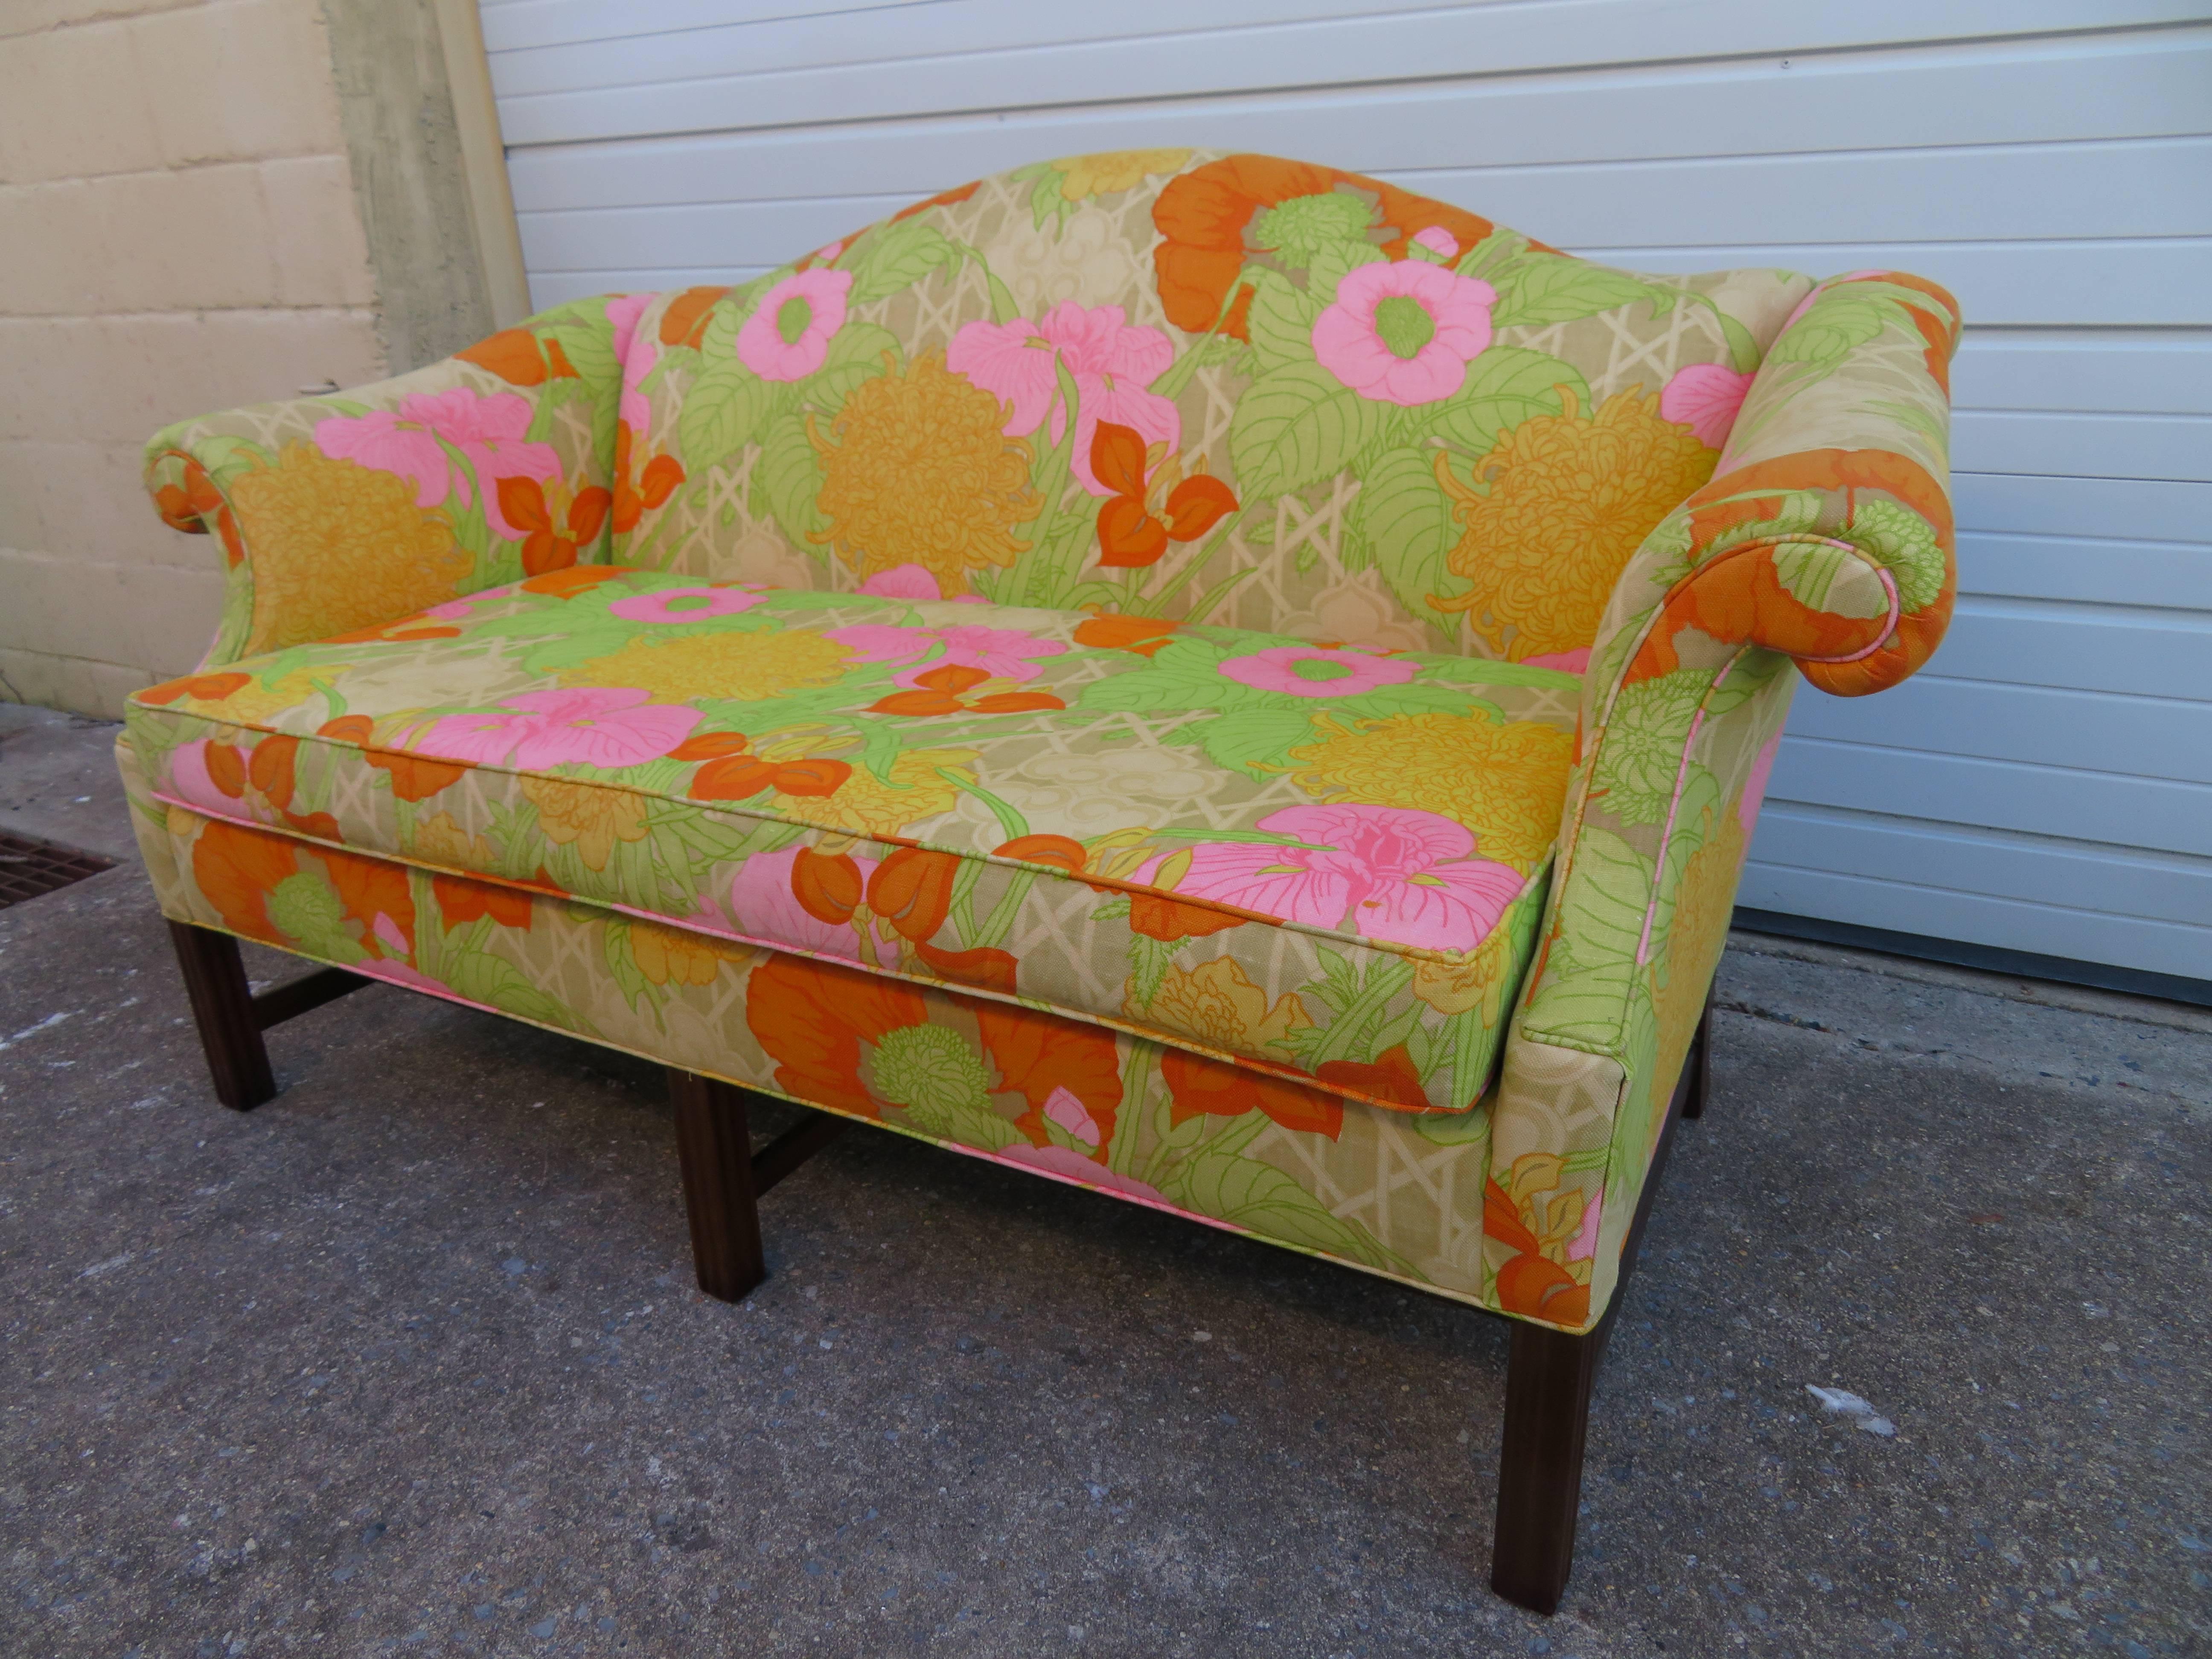 Wonderful flowered linen Chippendale style camelback loveseat sofa with mahogany legs.  We love the original bright flowered linen used on this sofa-gives it great vintage appeal.